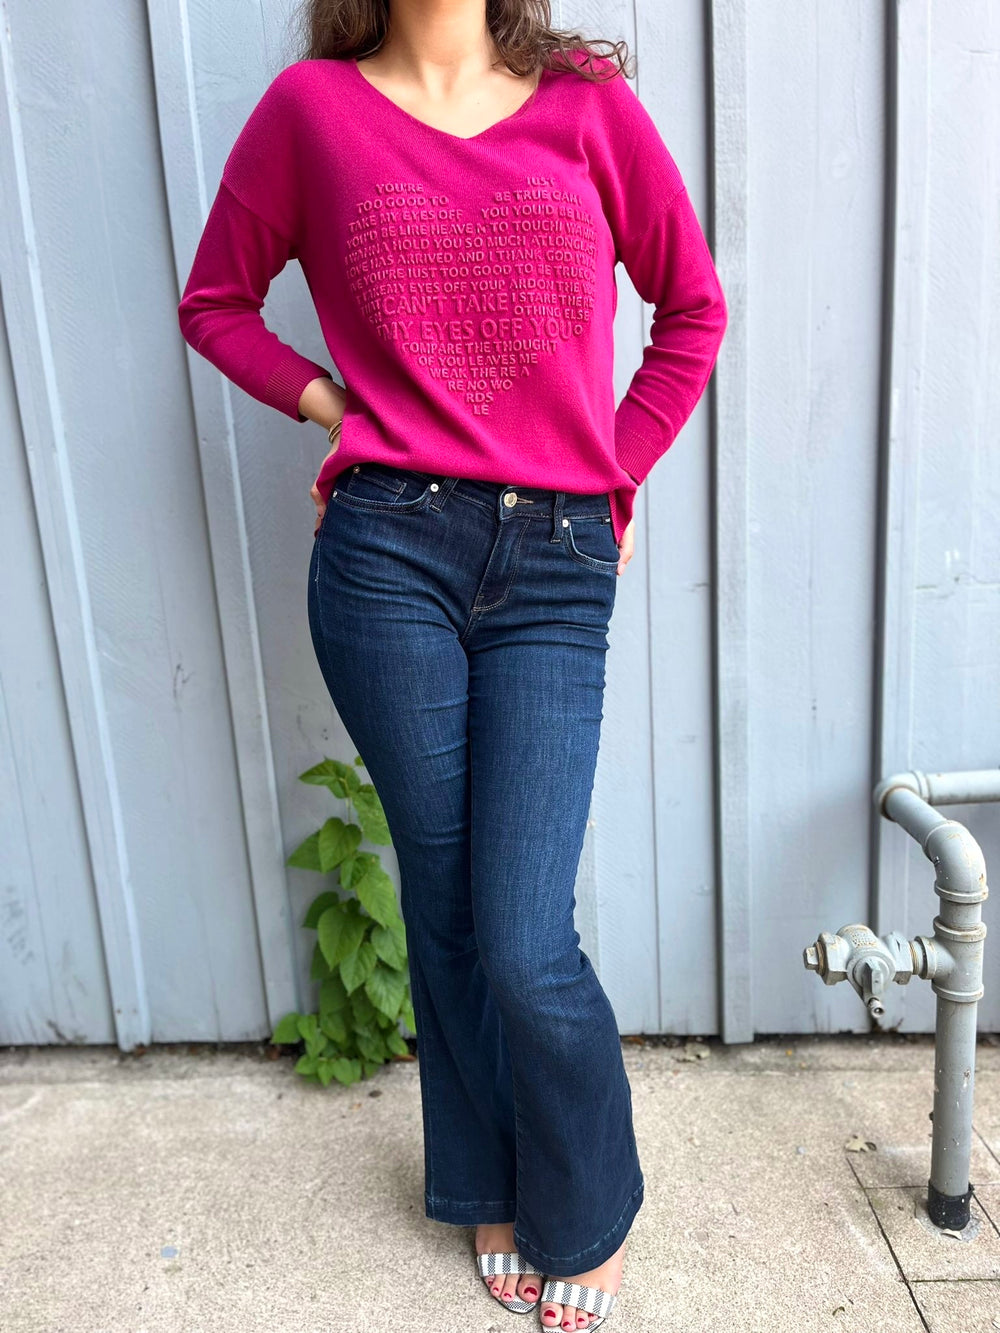 "YOU'RE TOO GOOD" MAGENTA KNIT TOP